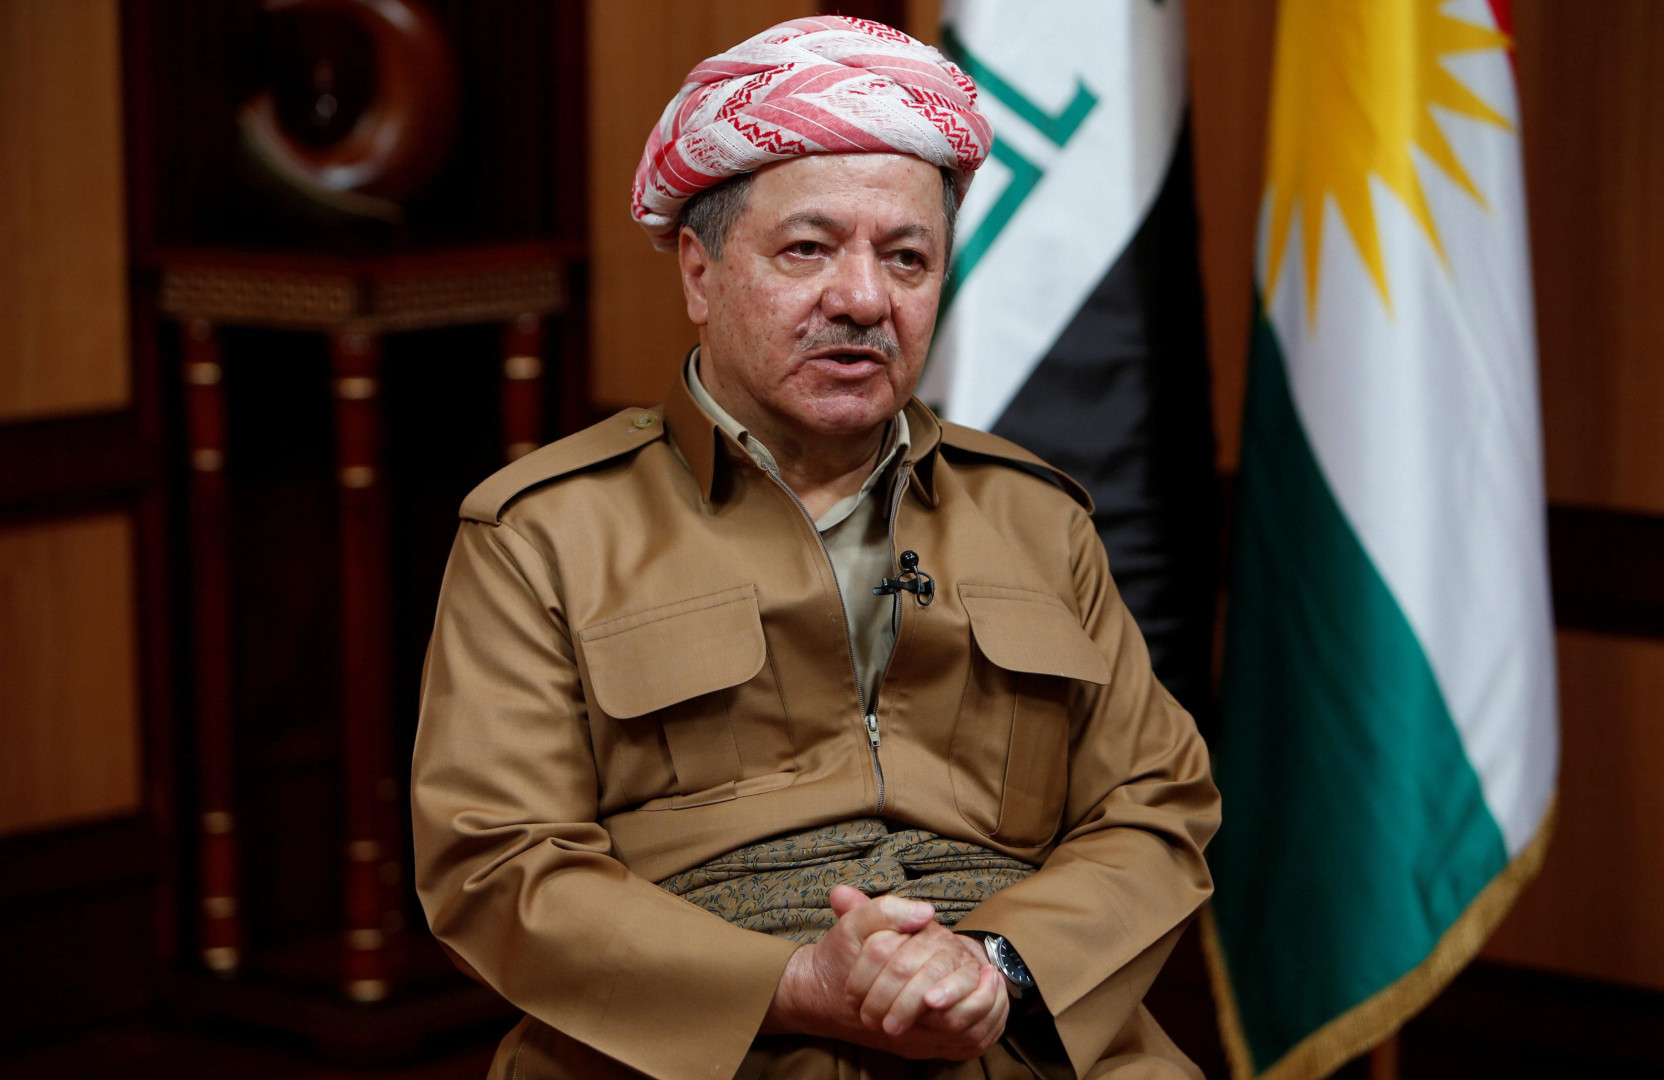 Masoud Barzani the experience of the Kurdistan region may not be successful in other countries